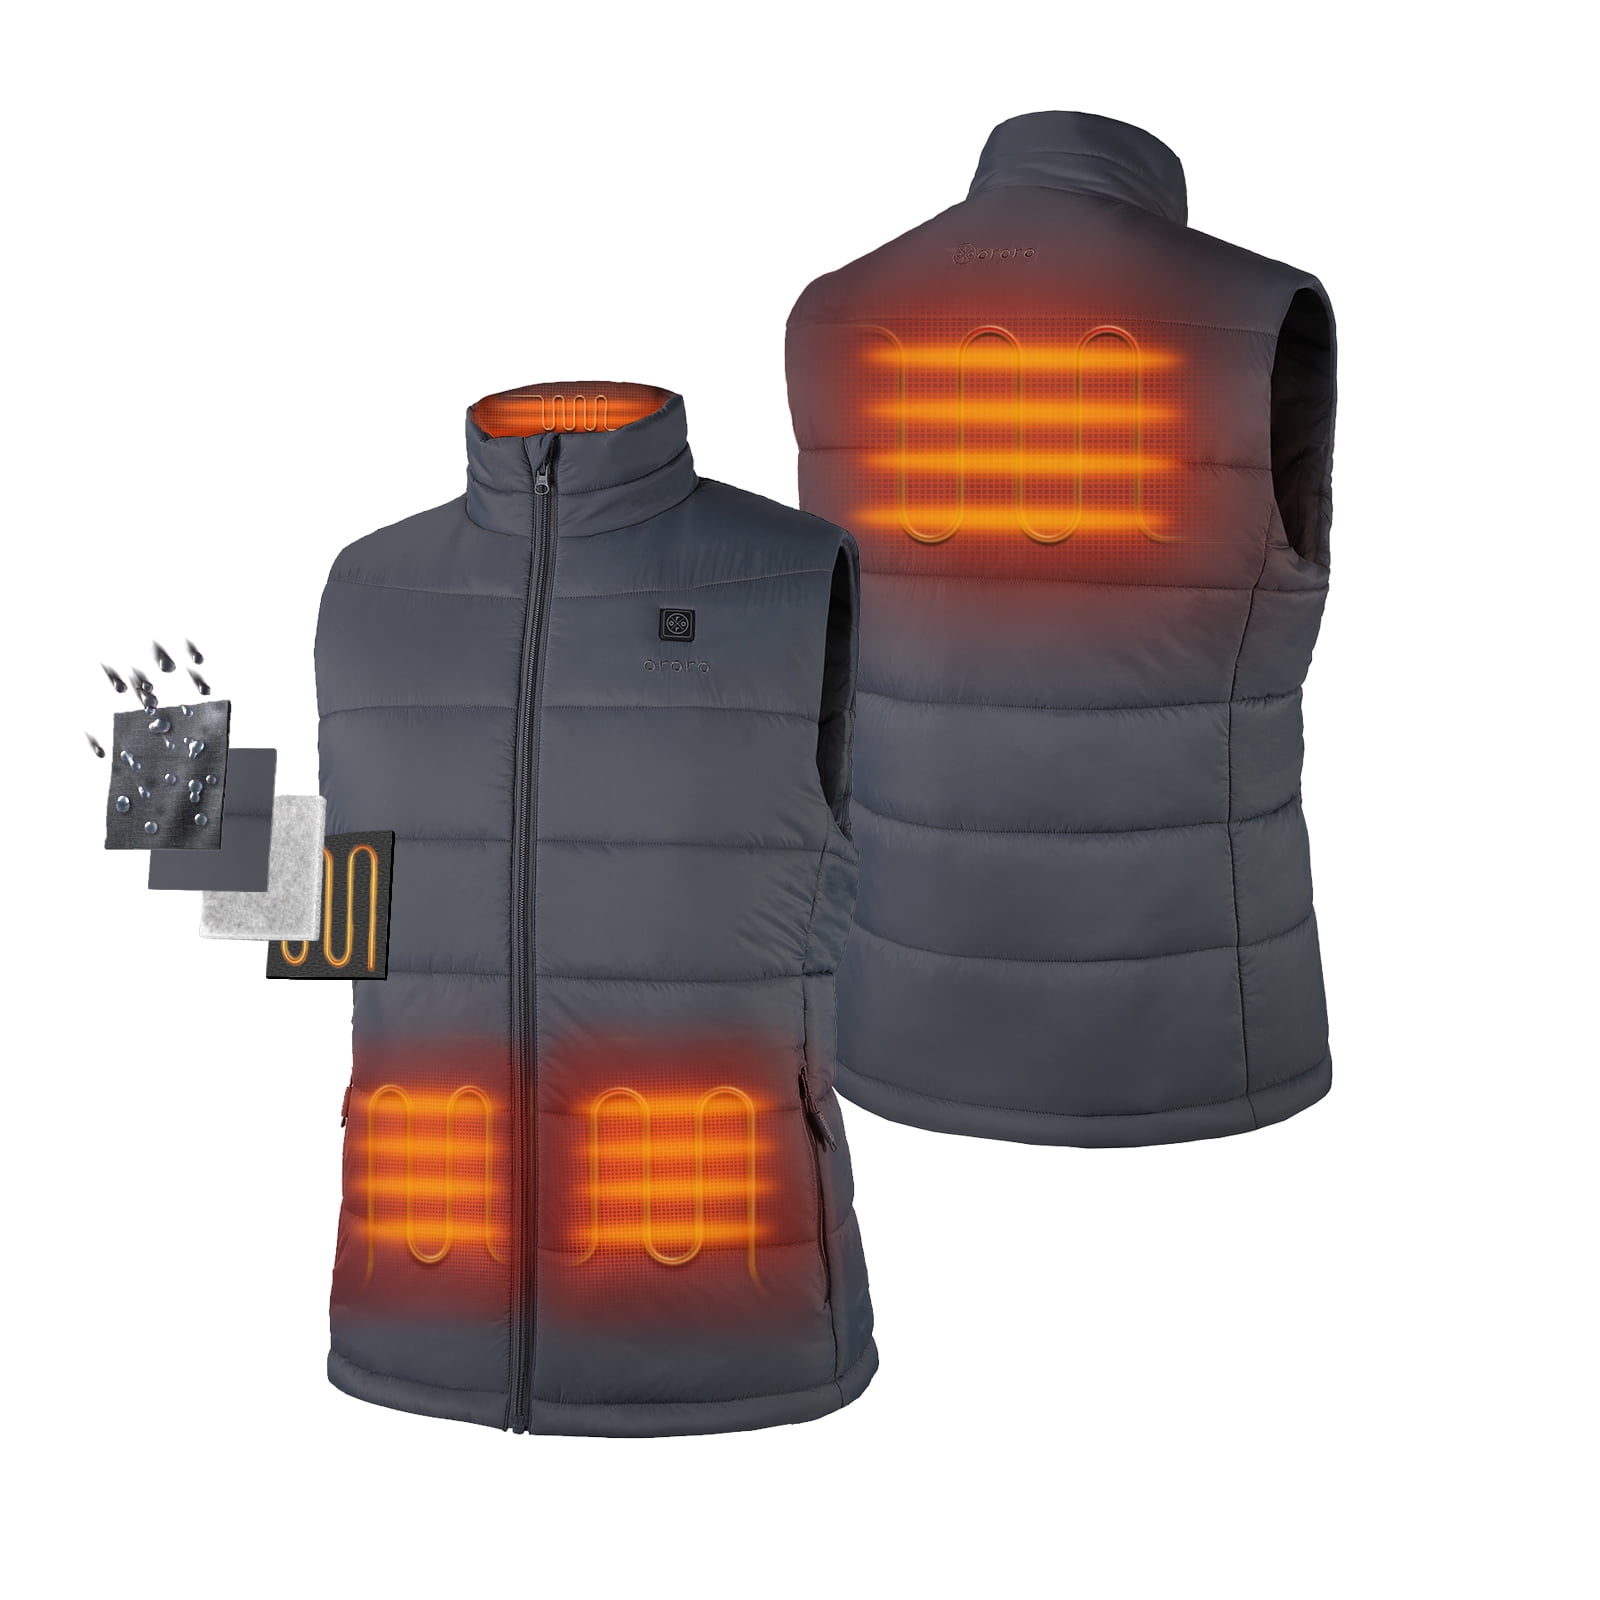 ORORO Men's Heated Vest With Battery Pack Lightweight Heated Gilet For Men 